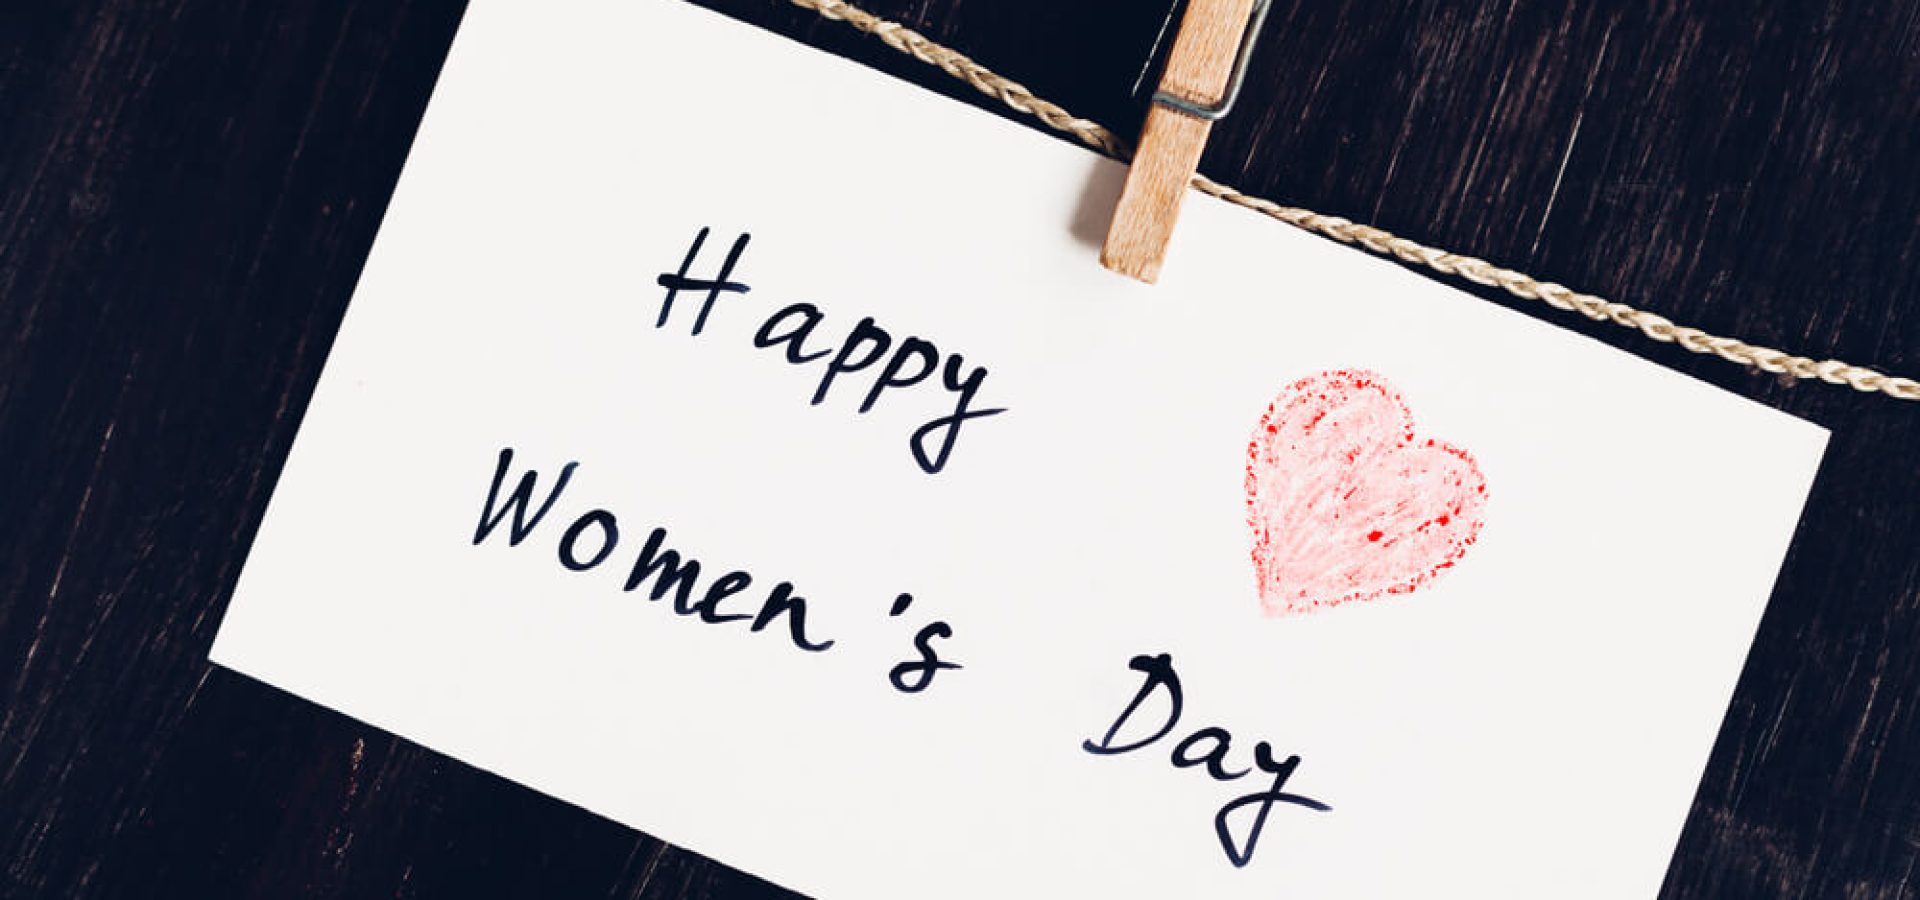 Happy Women's Day greeting message on bright white paper with red heart against a dark wooden background.